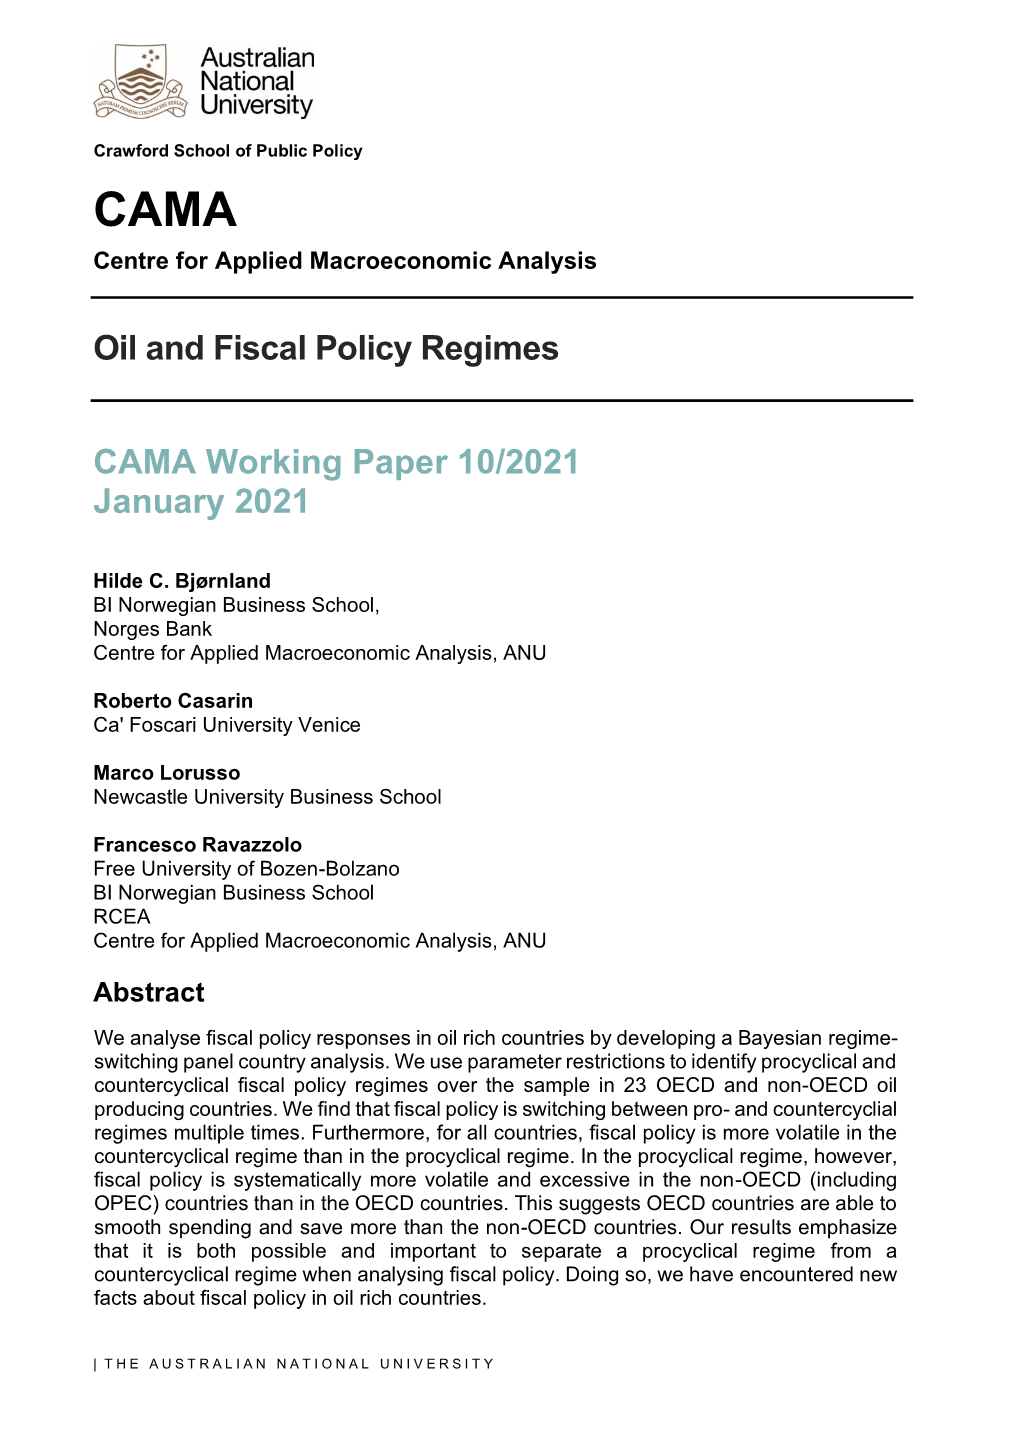 Oil and Fiscal Policy Regimes CAMA Working Paper 10/2021 January 2021